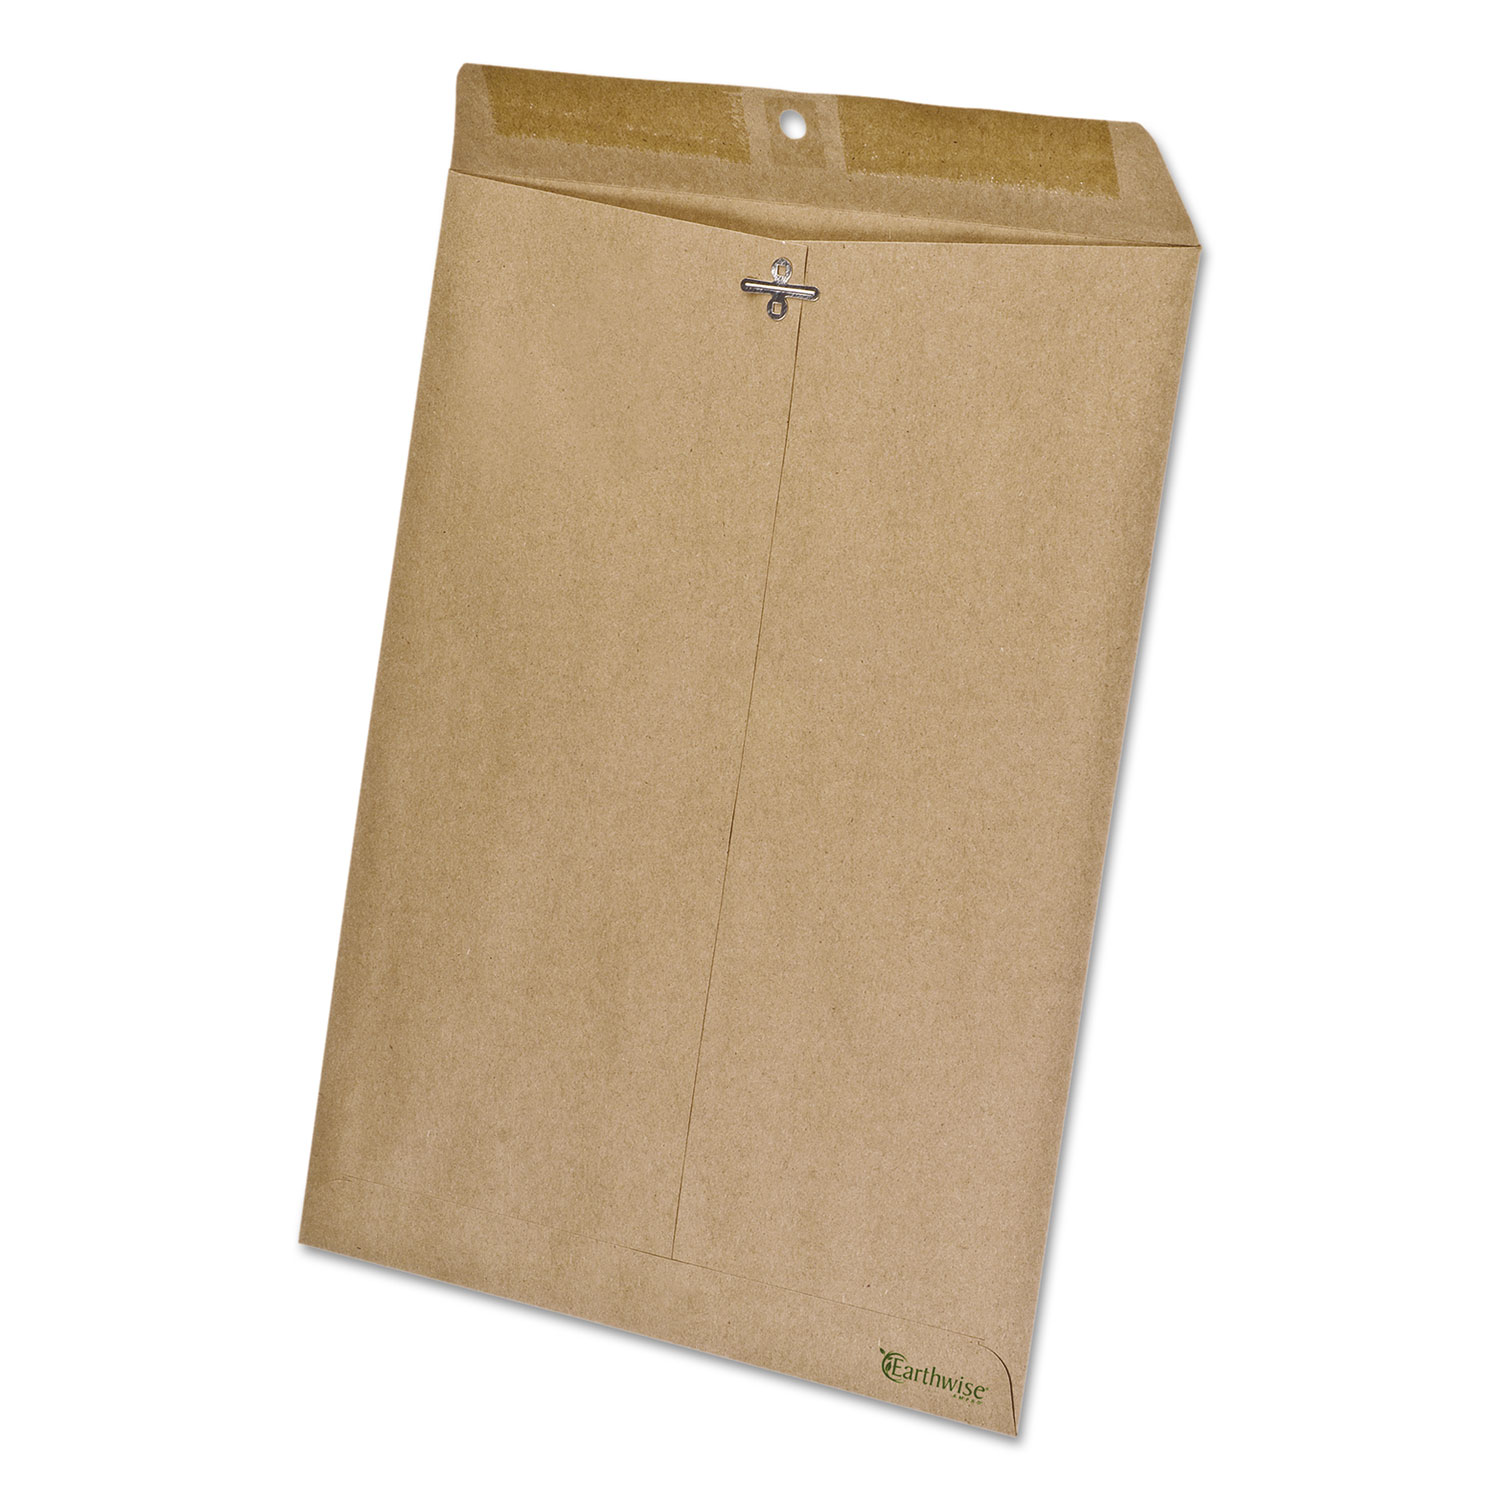 Earthwise by Ampad 100% Recycled Paper Envelope, 10 x 13, Brown, 110/Box